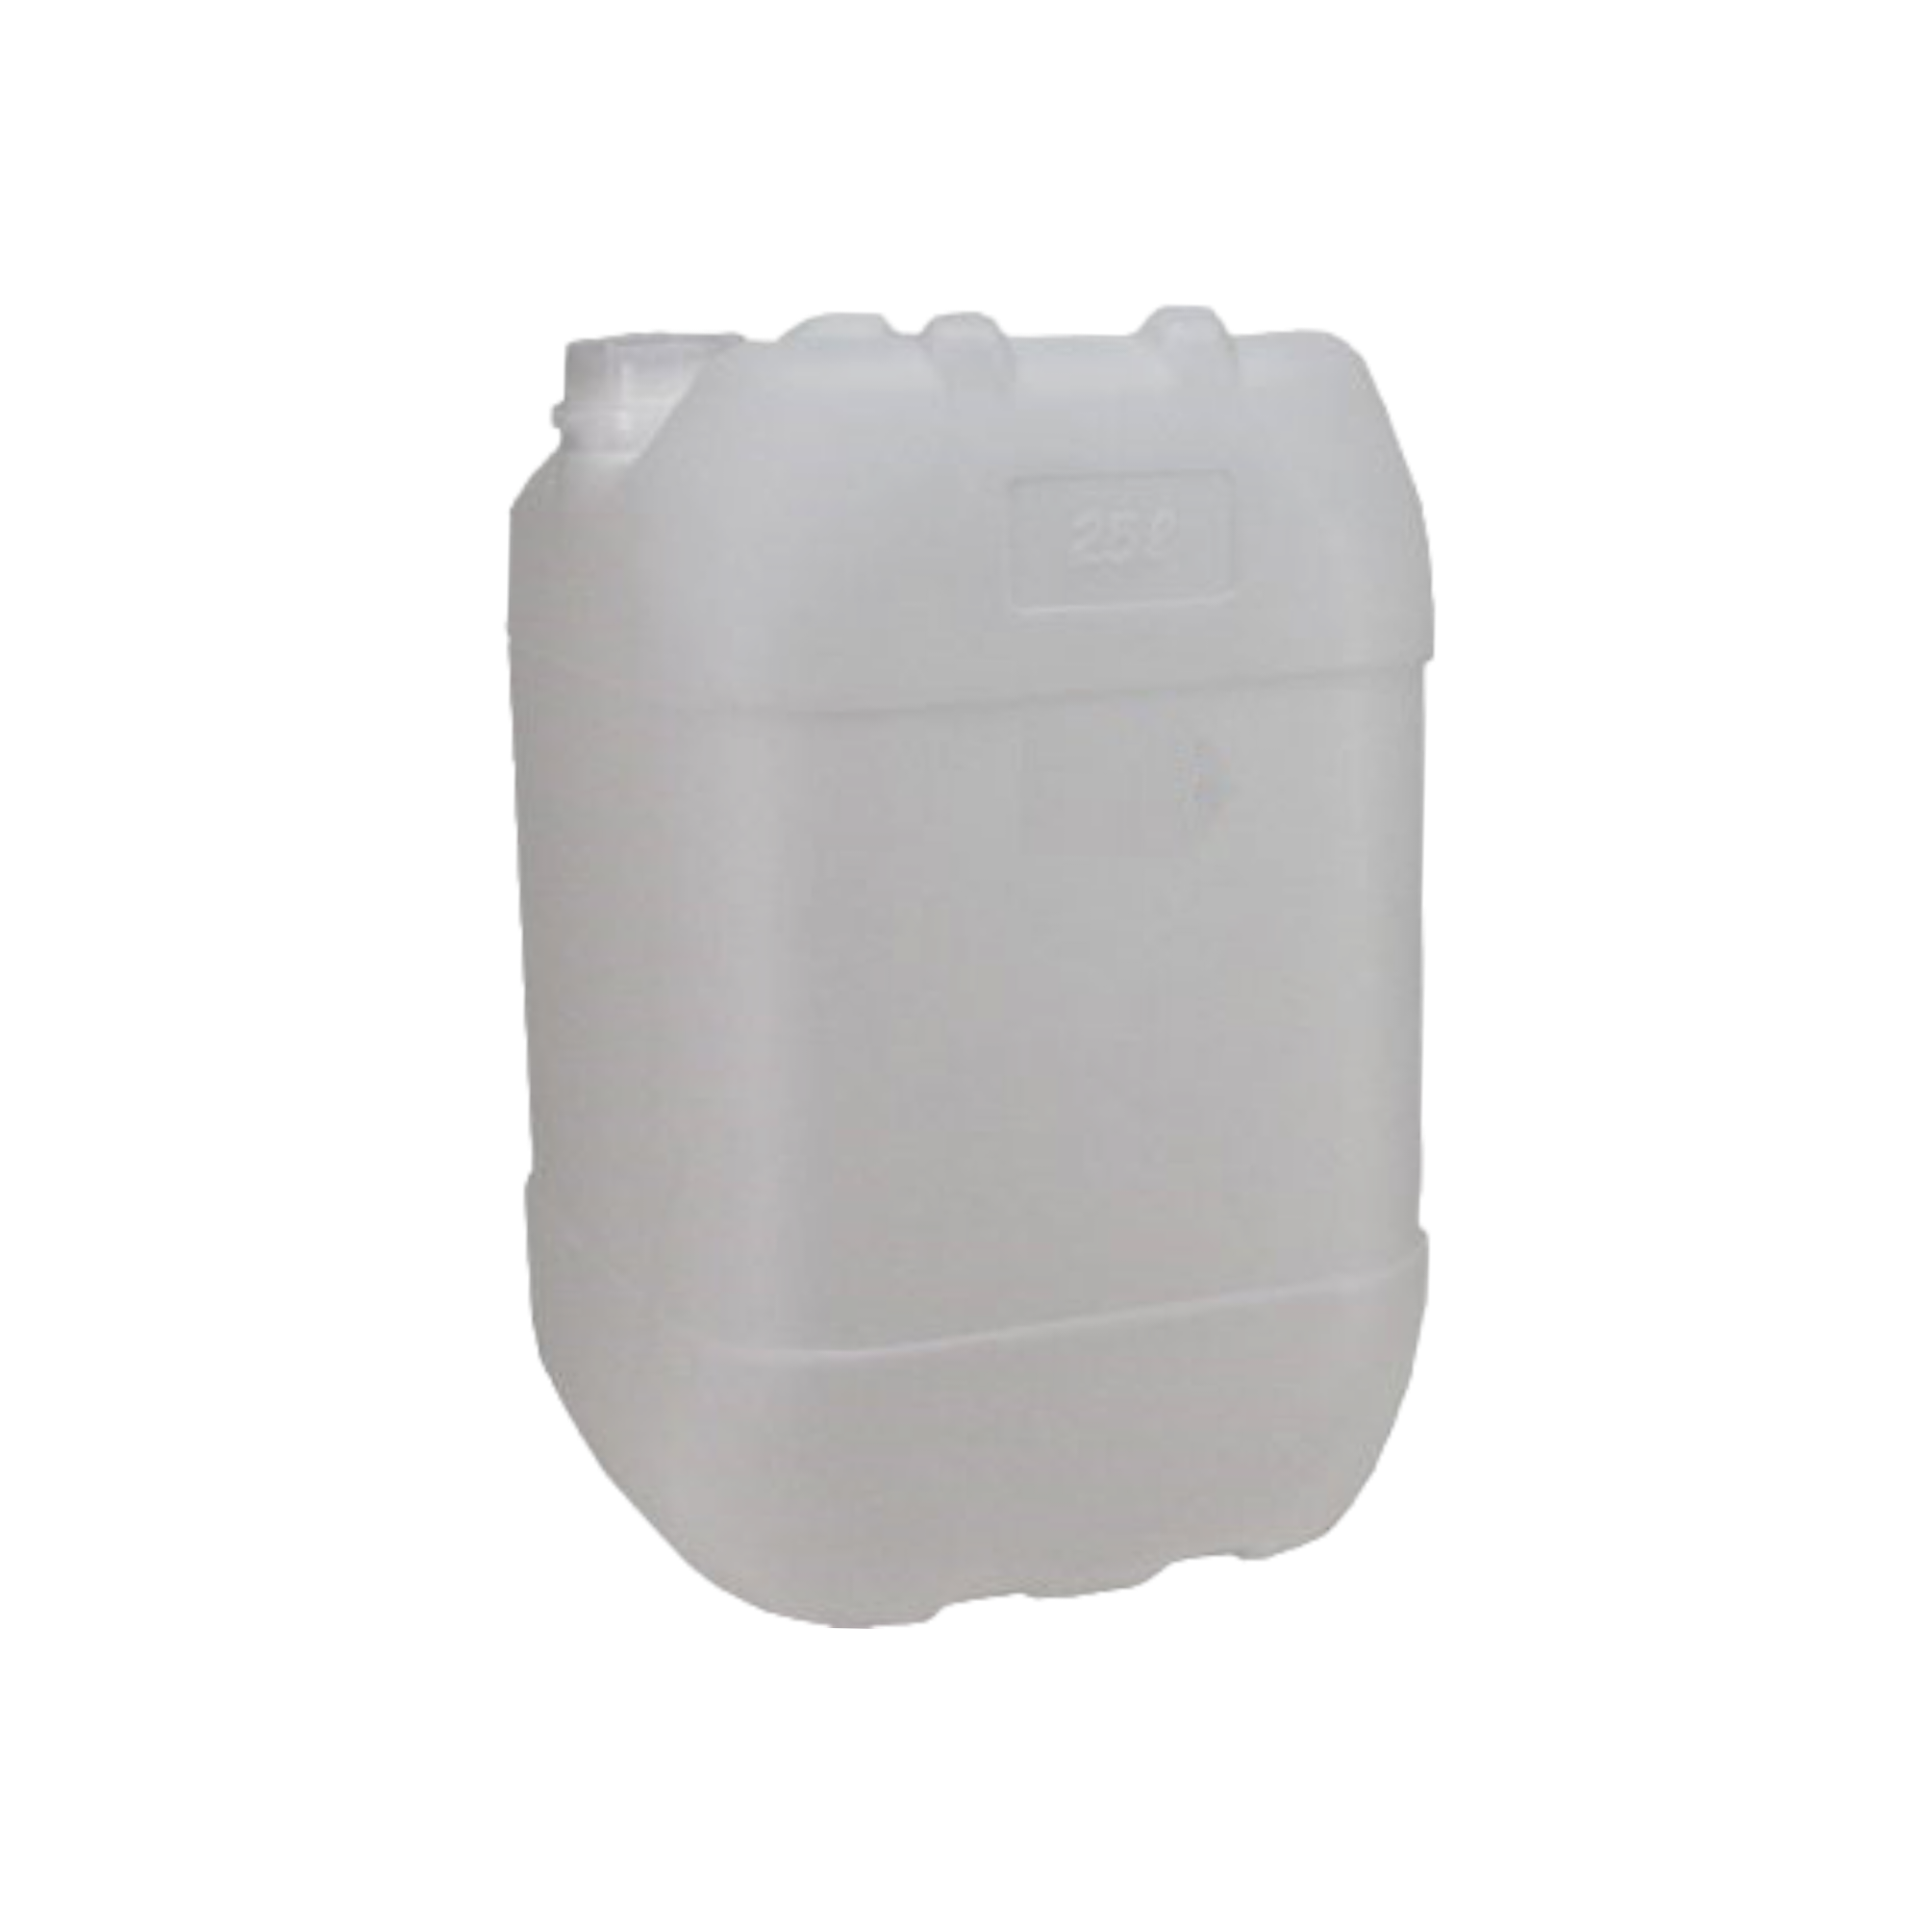 25L Plastic Jerry Can 950g - Heavy Duty Water Container Natural